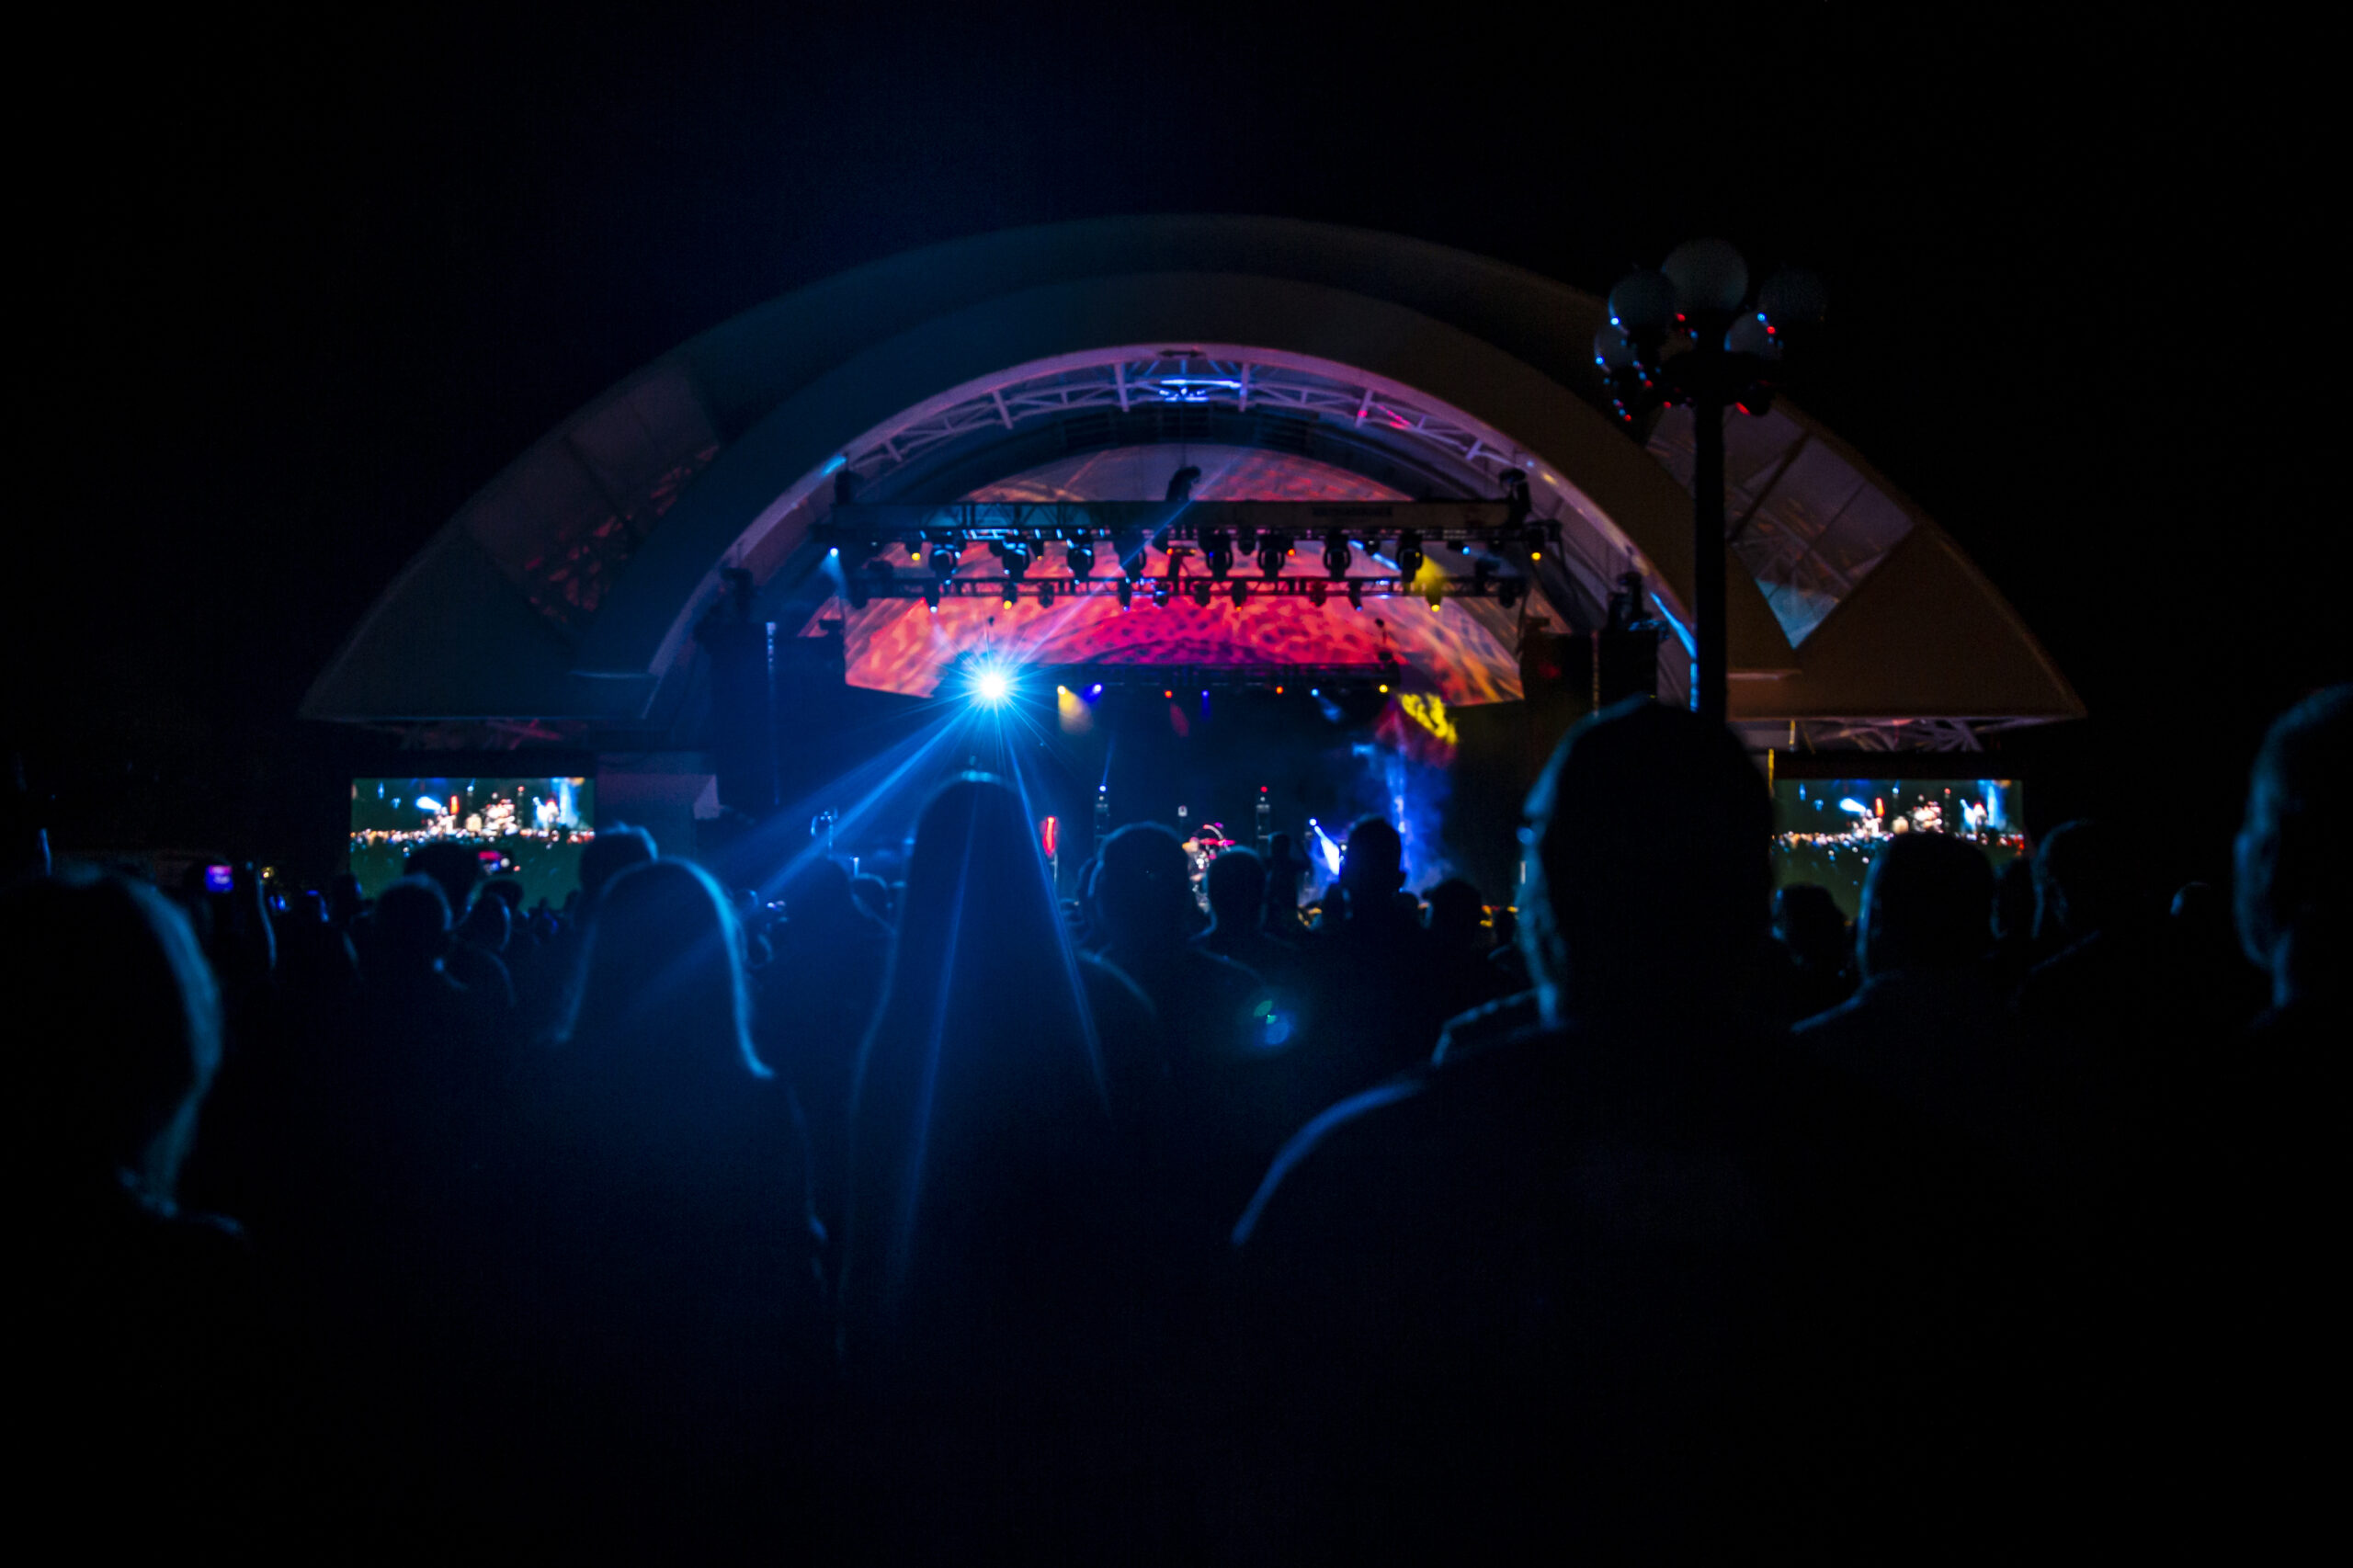 Image of the Bandshell at night. View of the crowd from behind as they enjoy a concert at night. The Bandshell stage is illuminated in blue and pink.